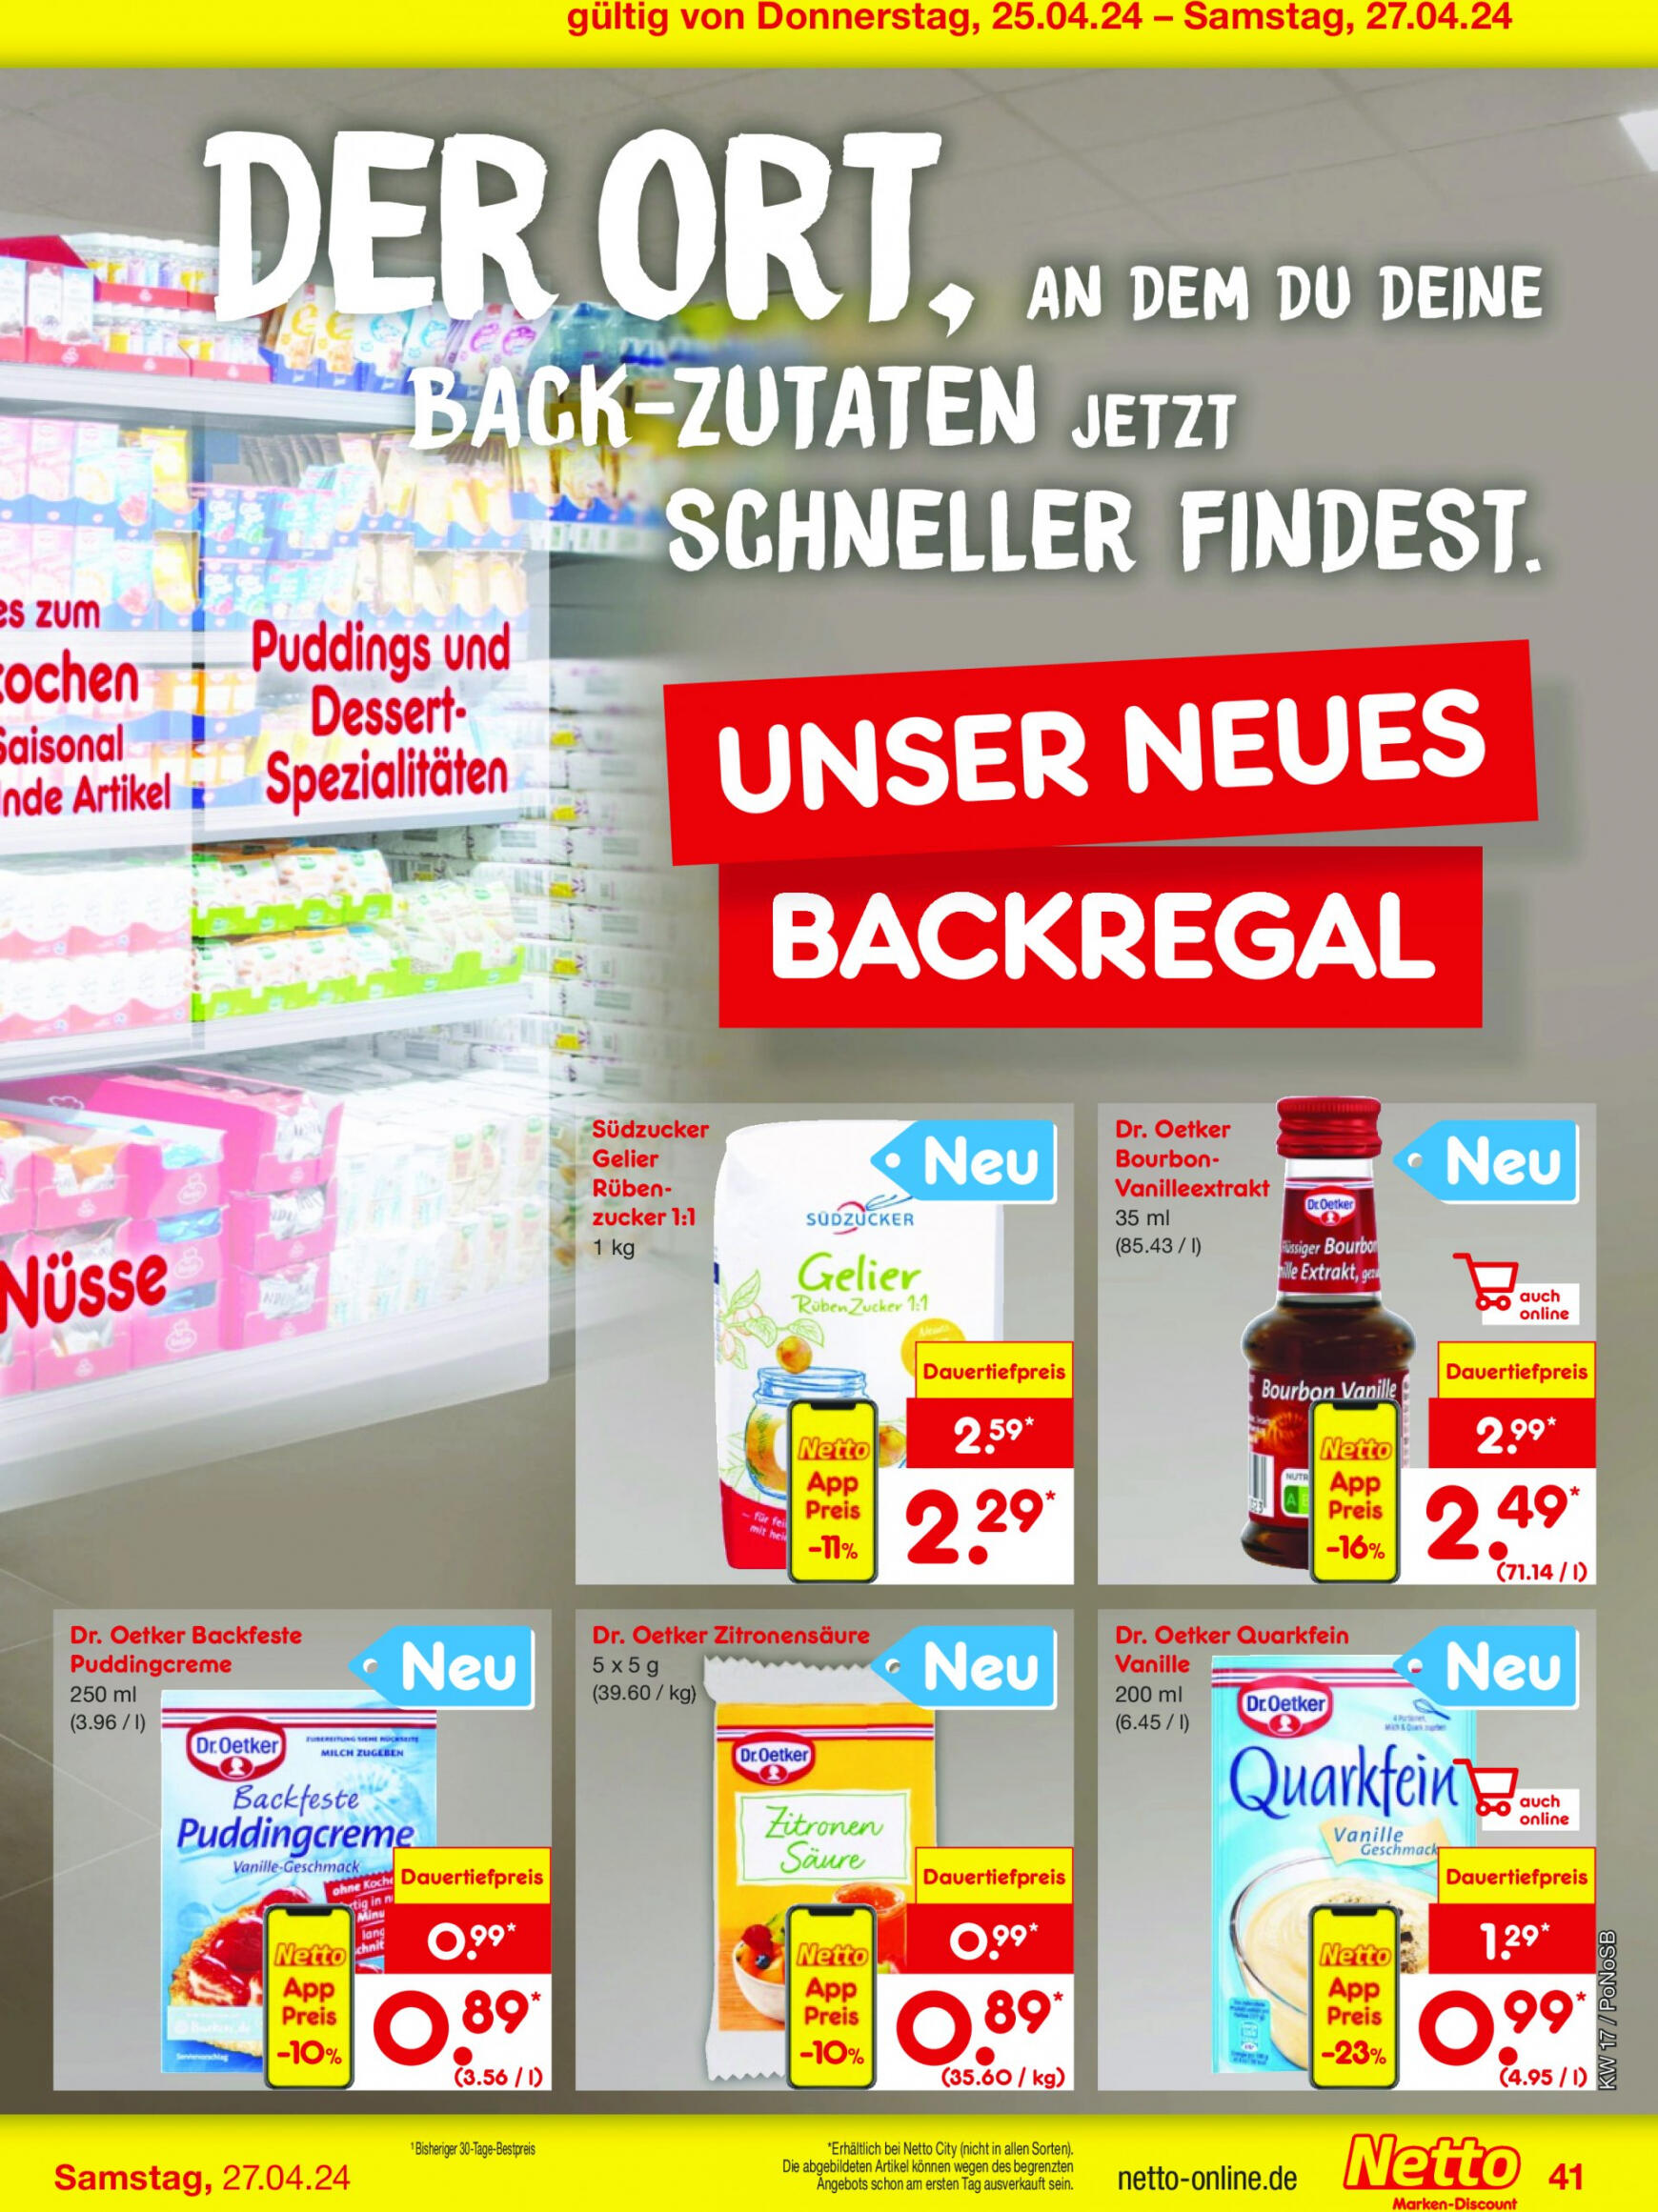 netto - Flyer Netto aktuell 22.04. - 27.04. - page: 47